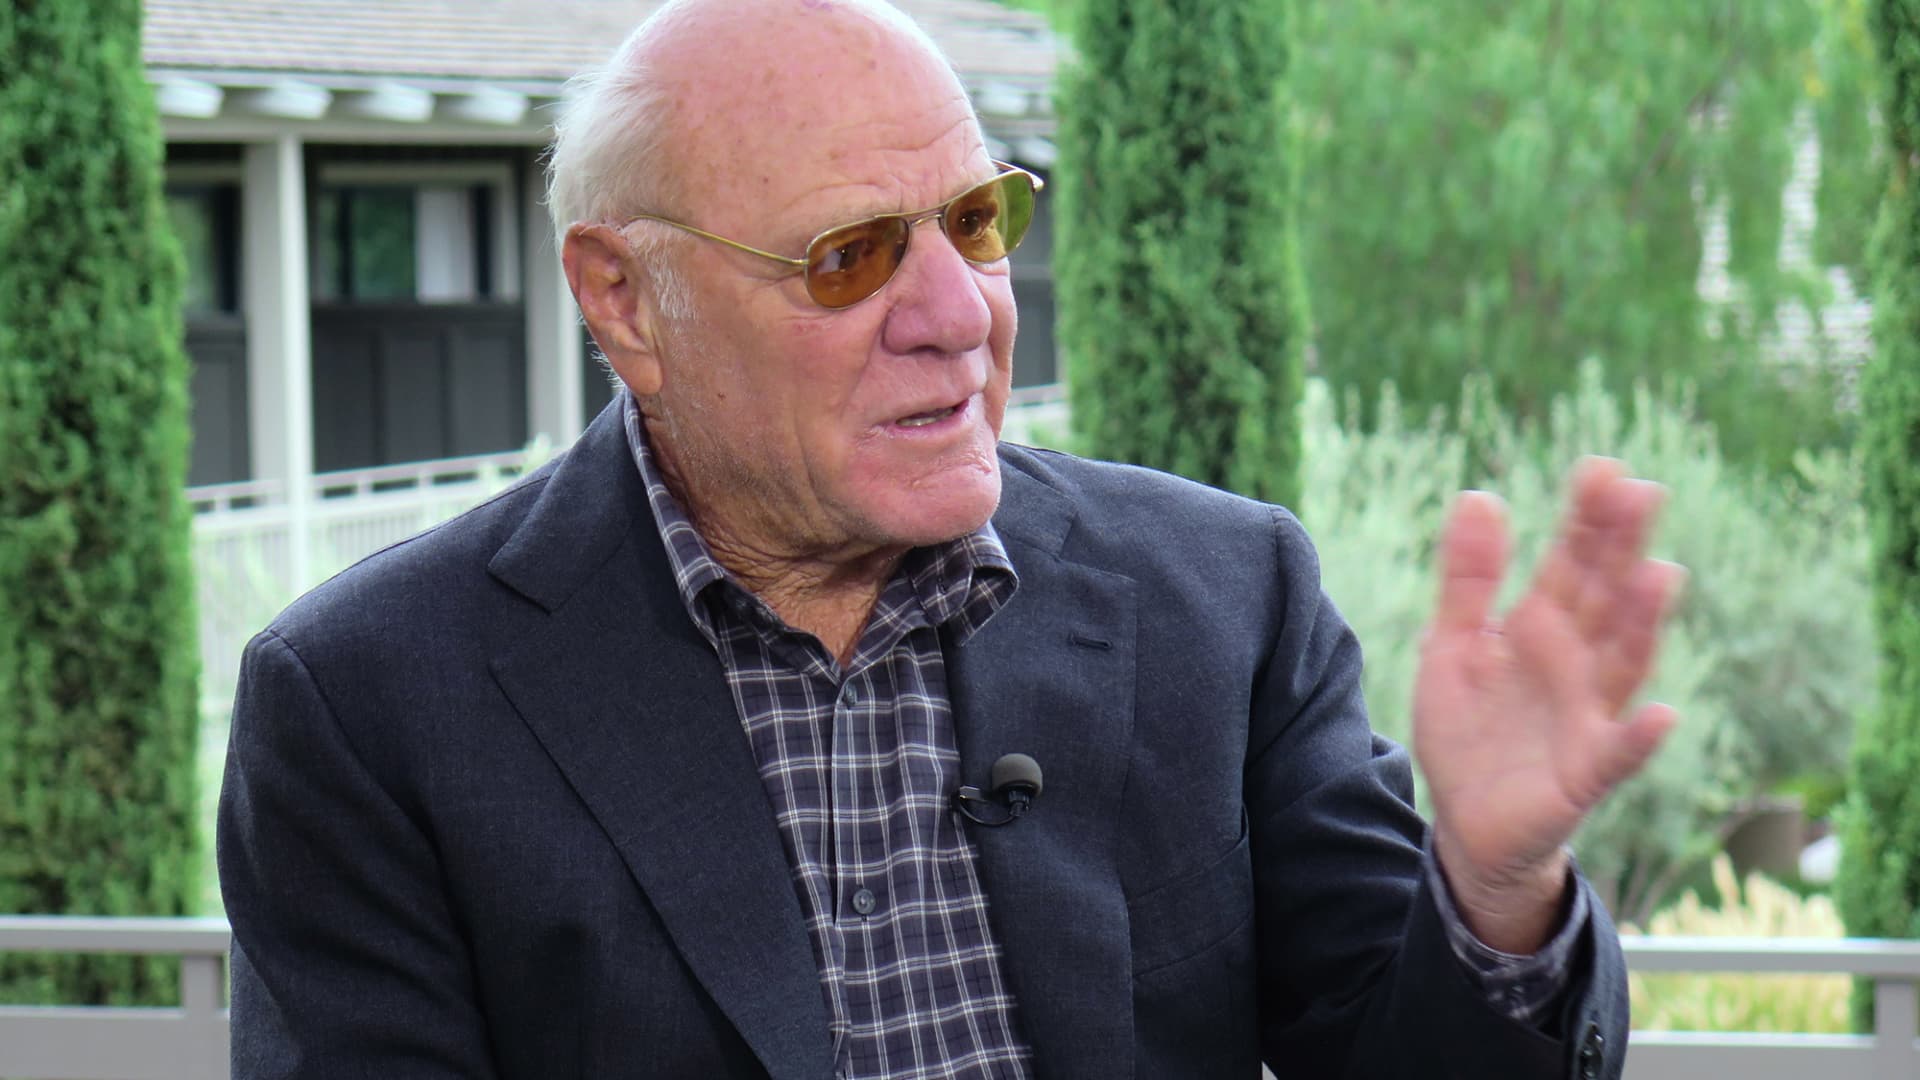 Hollywood studios should cut Netflix out of strike negotiations, Barry Diller says